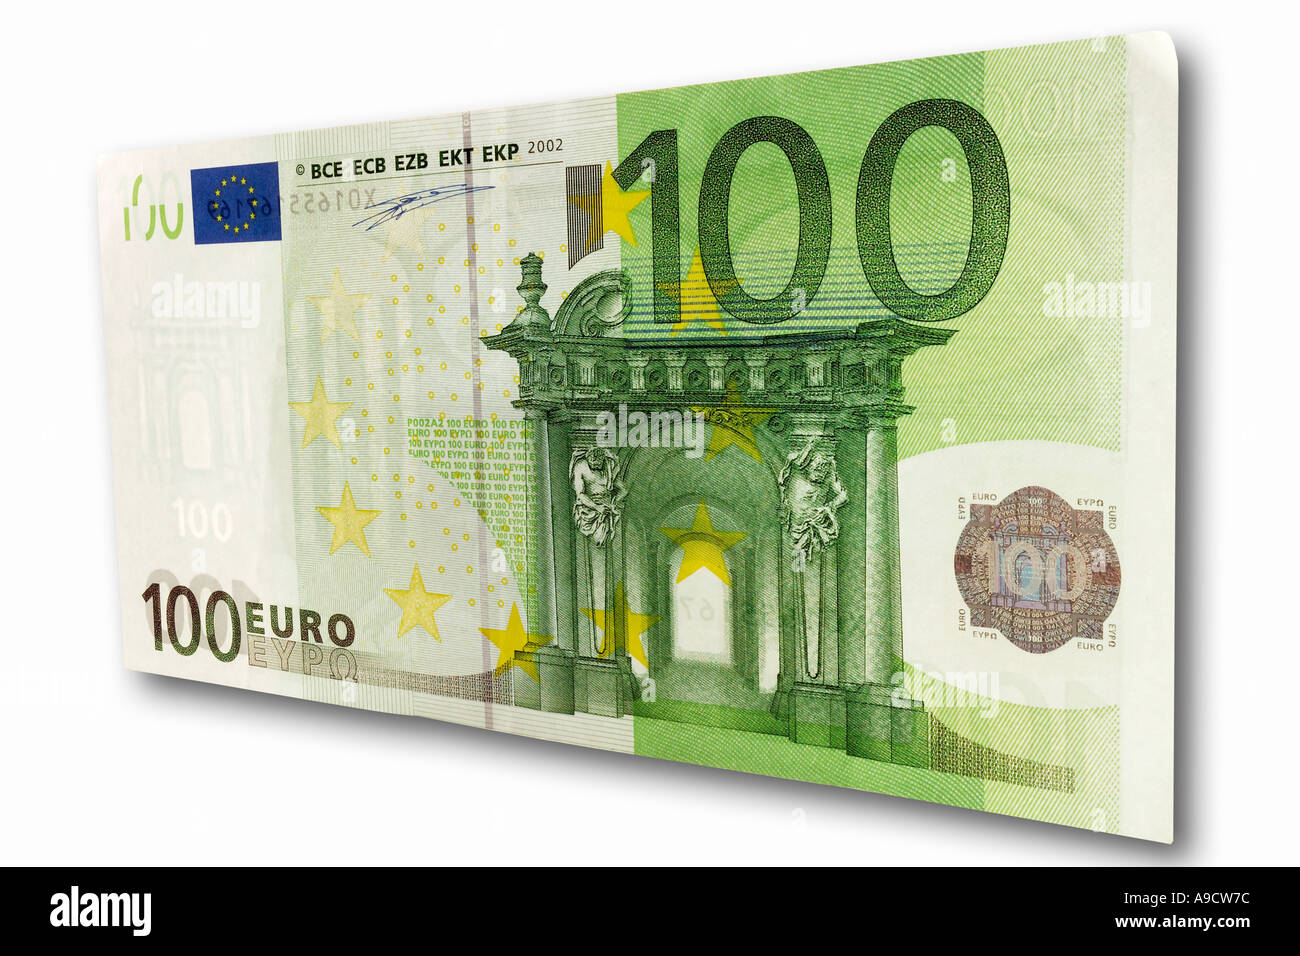 One hundred Euro note, close-up Stock Photo